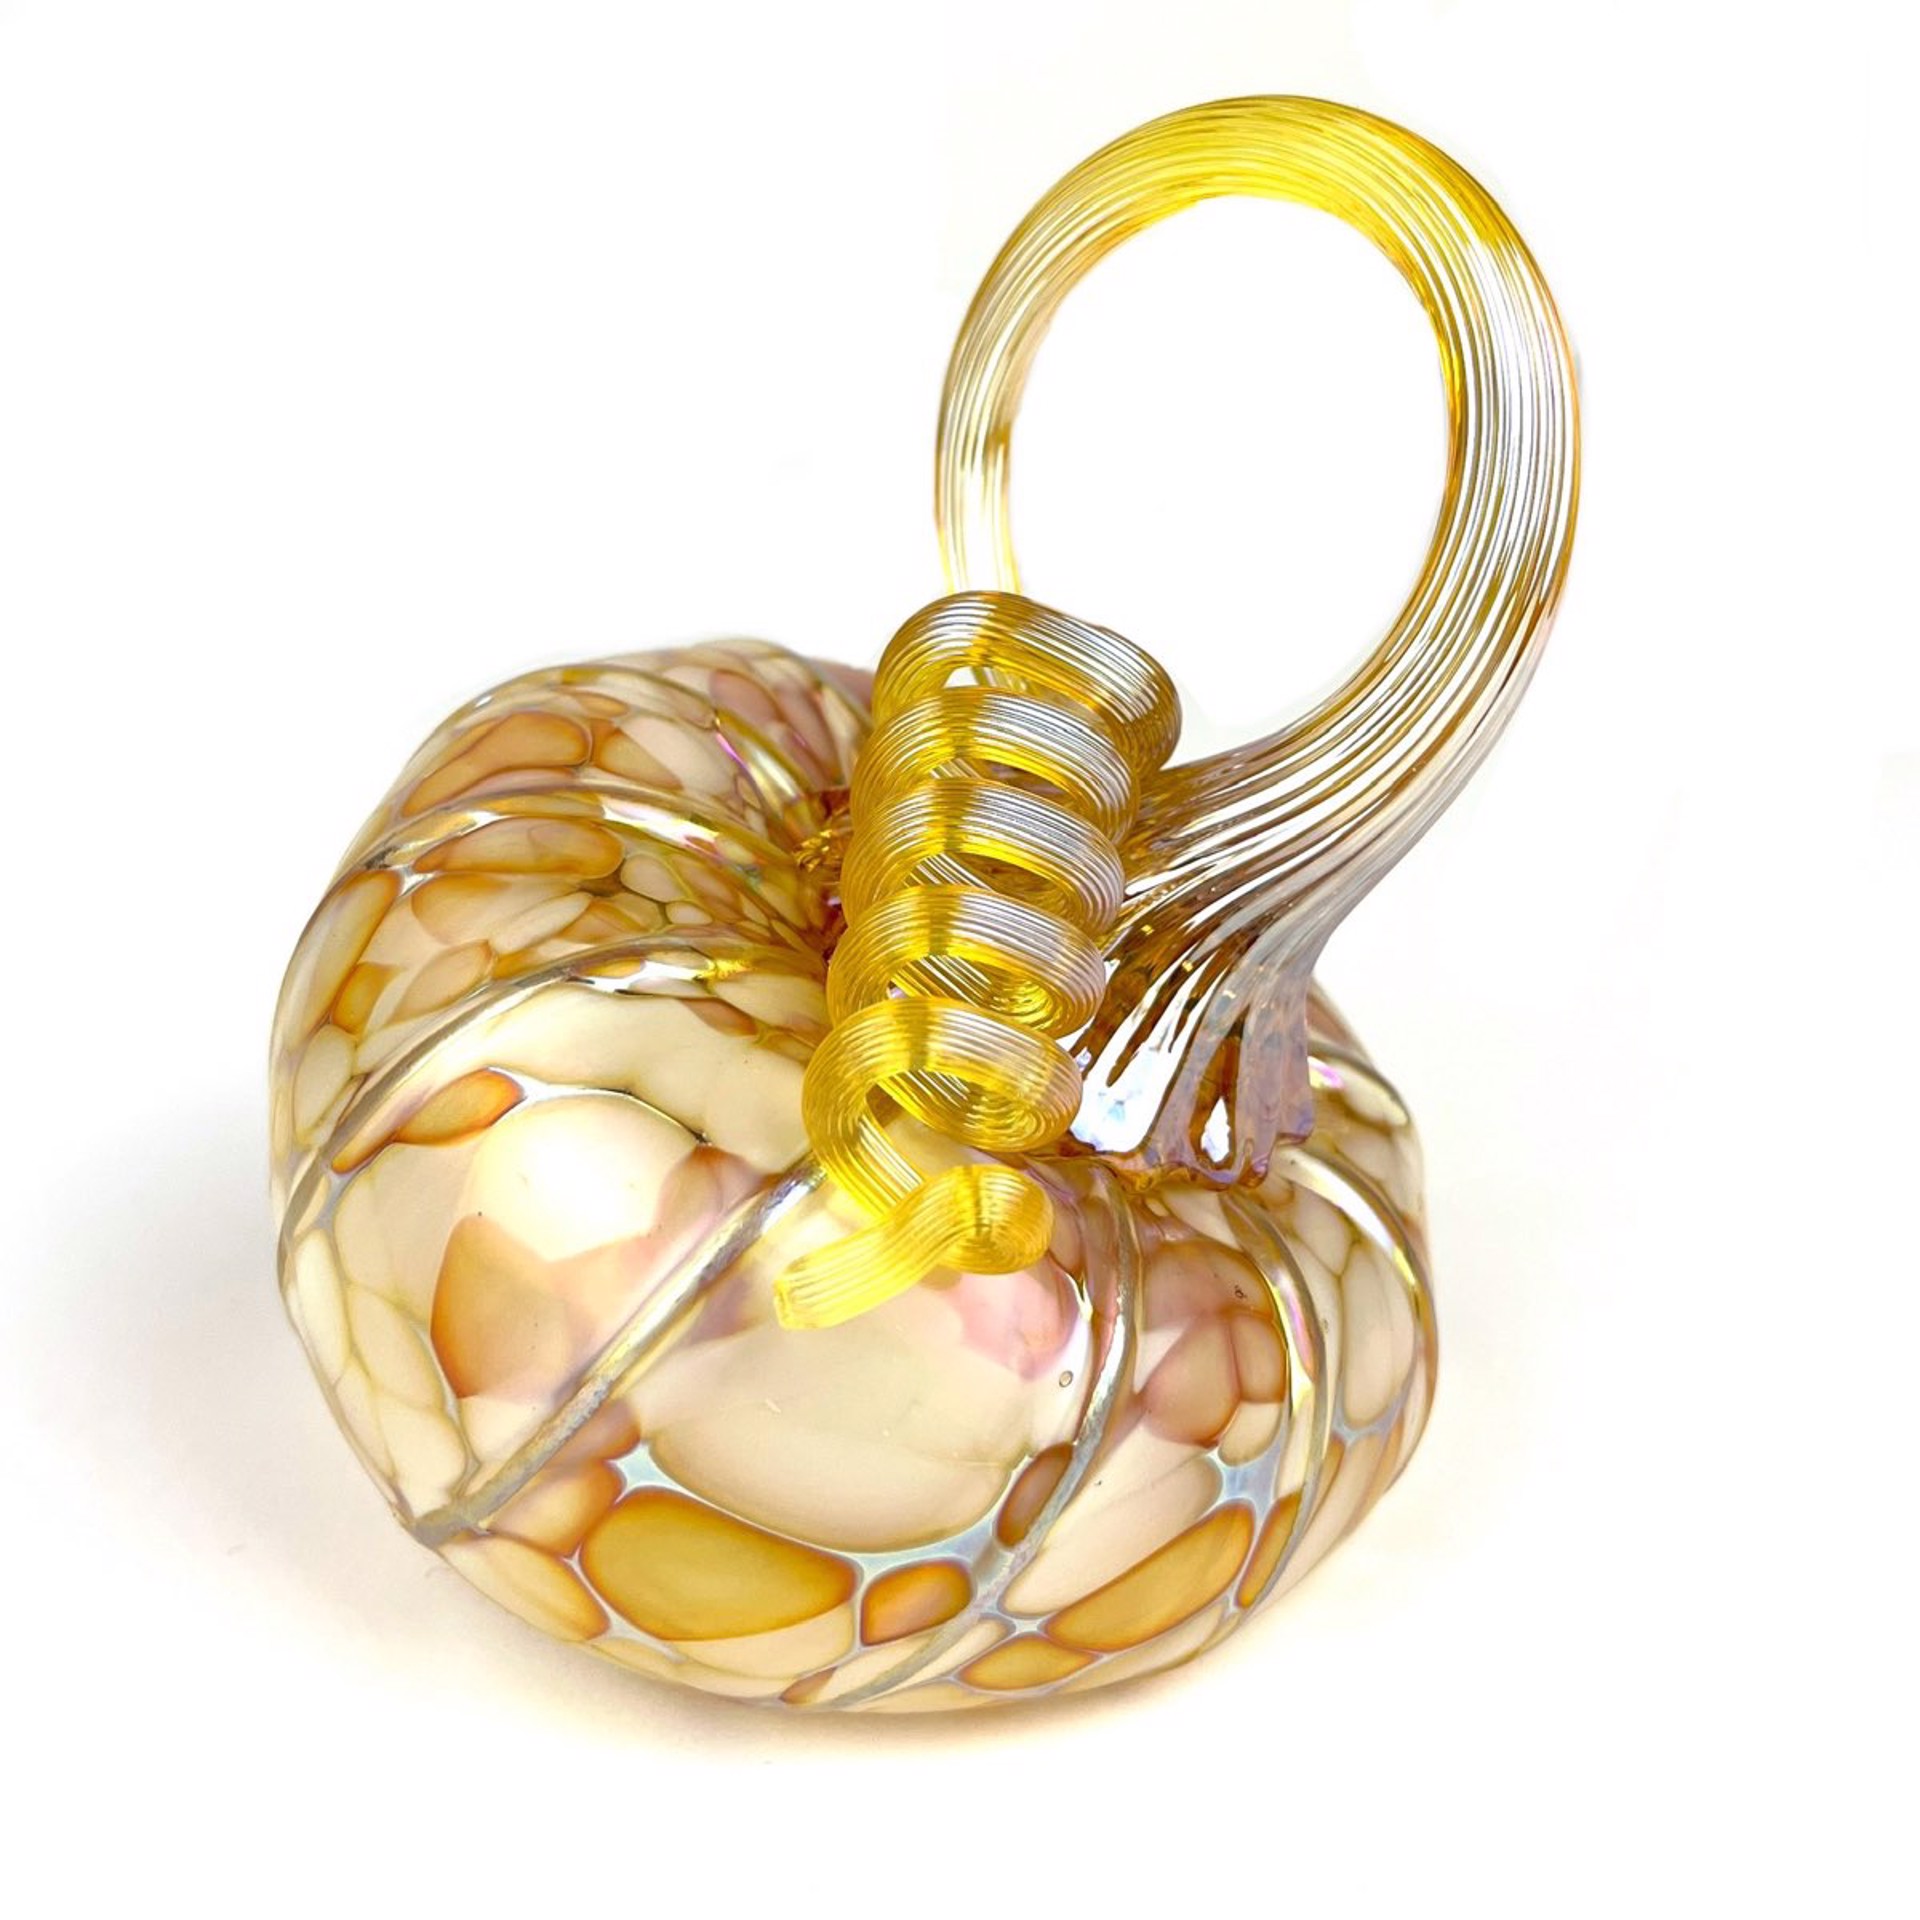 Small Tilted Ivory Pumpkin by Furnace Glass